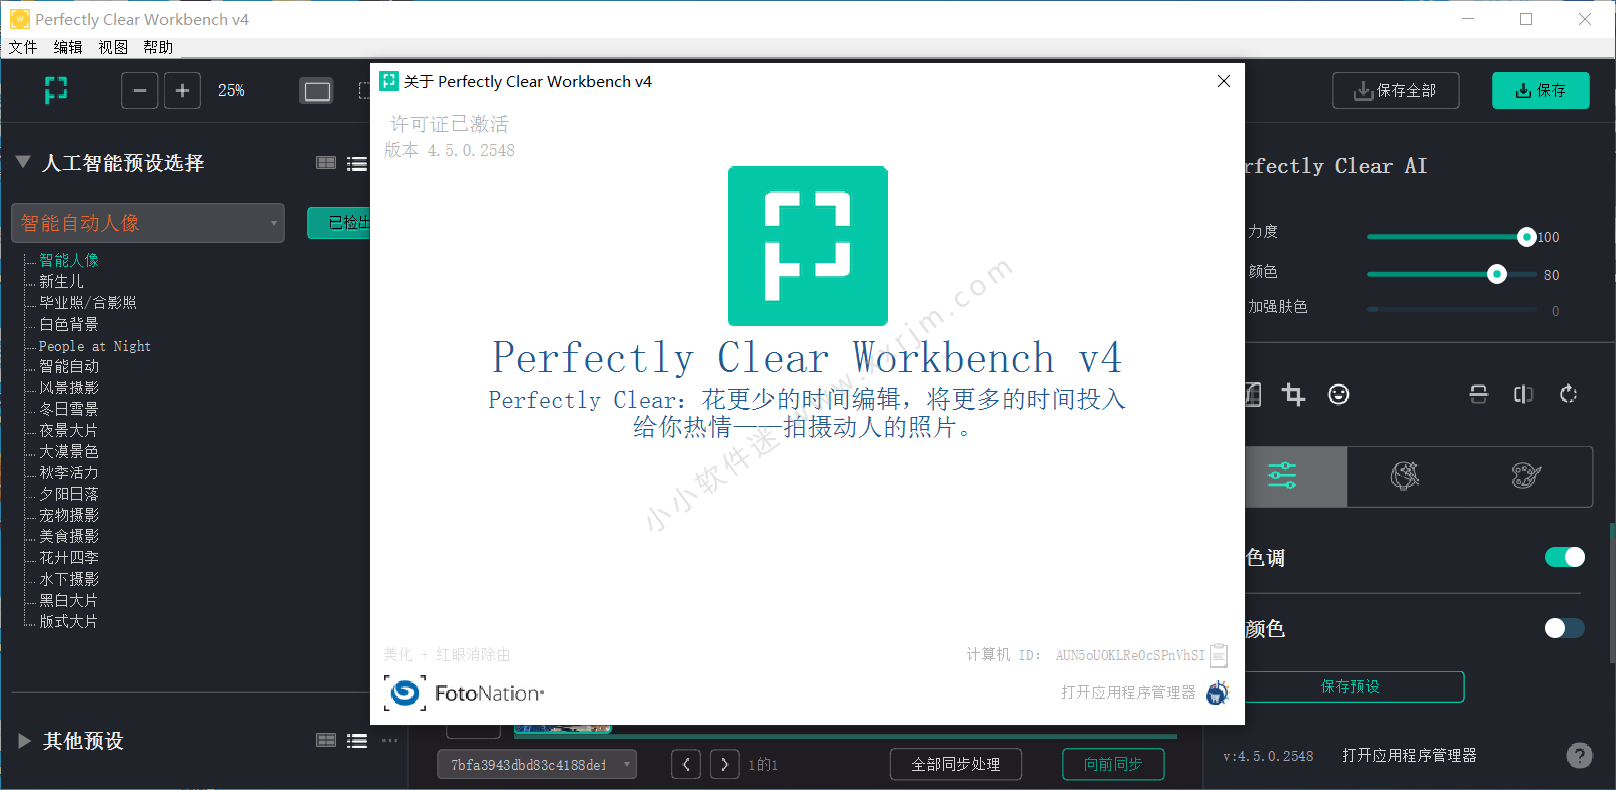 instal the new for windows Perfectly Clear WorkBench 4.5.0.2548